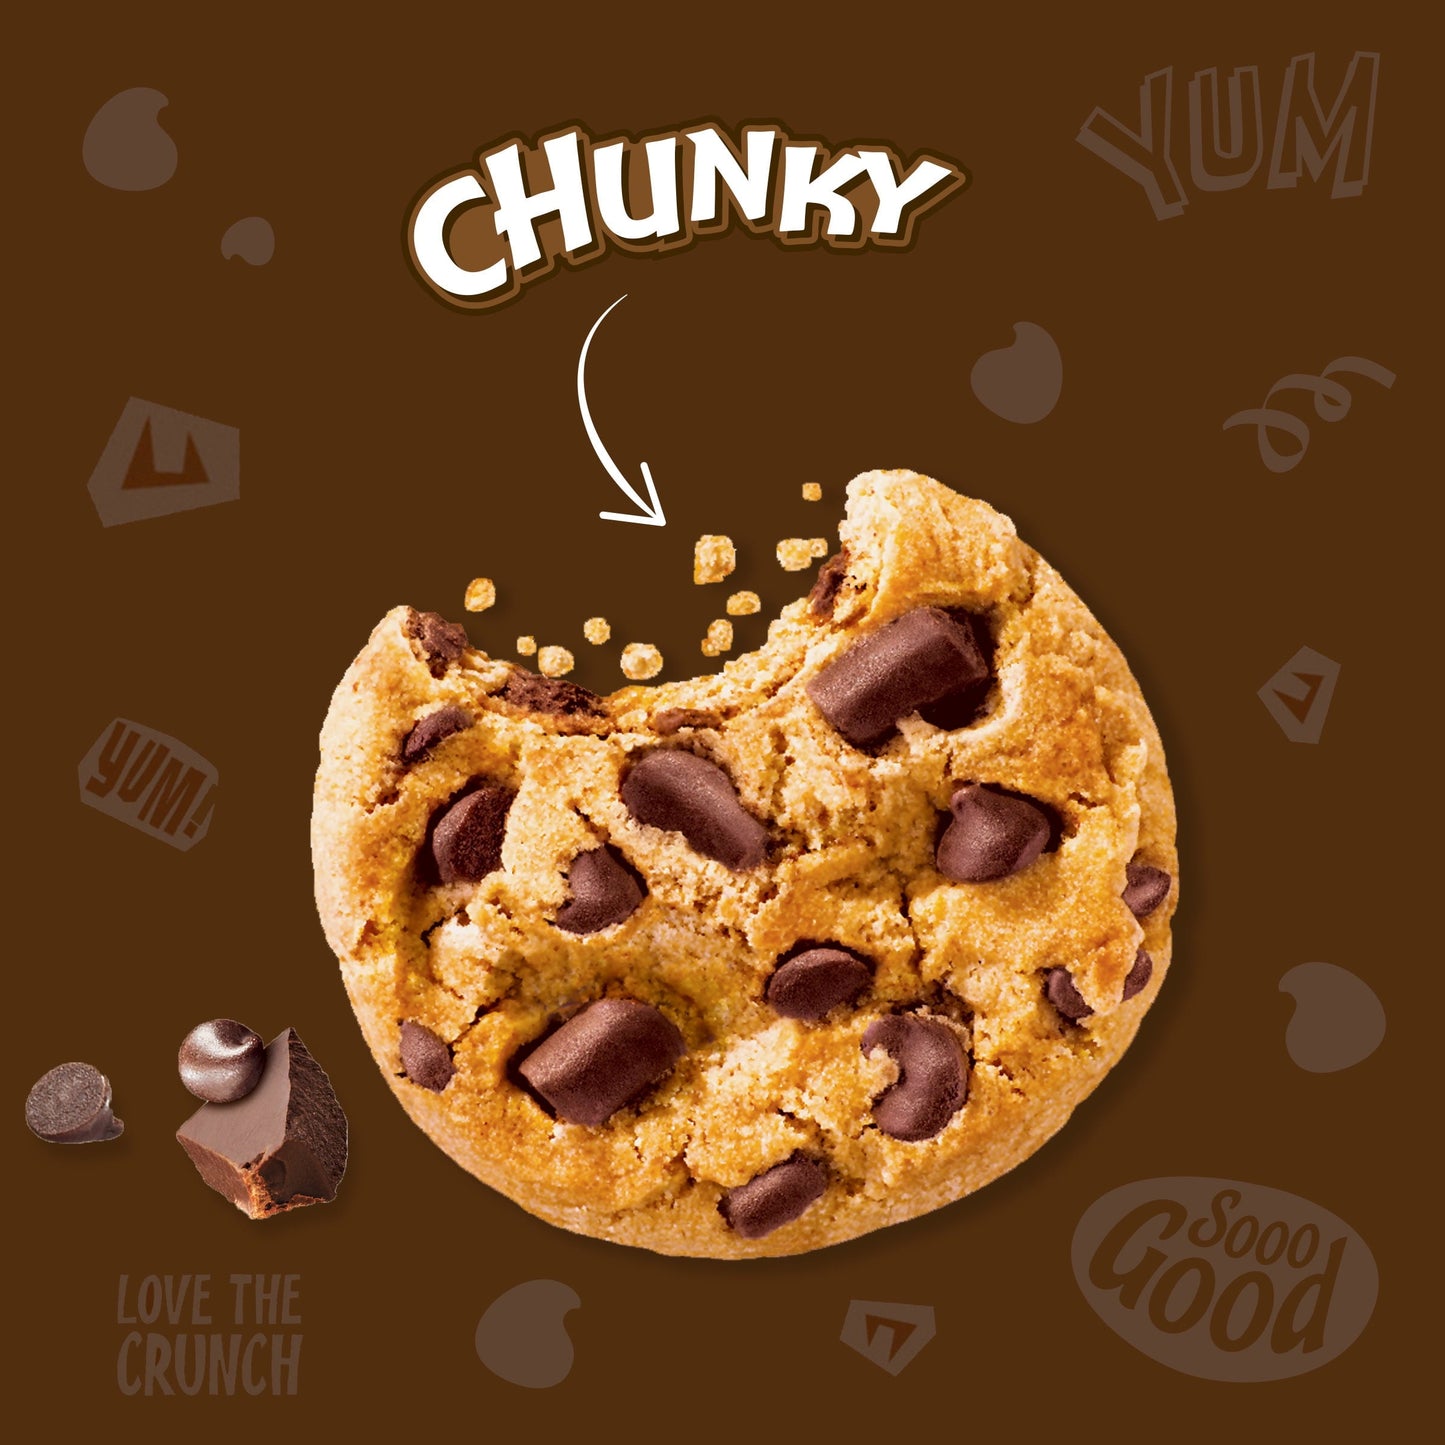 CHIPS AHOY! Chunky Chocolate Chunk Cookies, Party Size, 24.75 oz